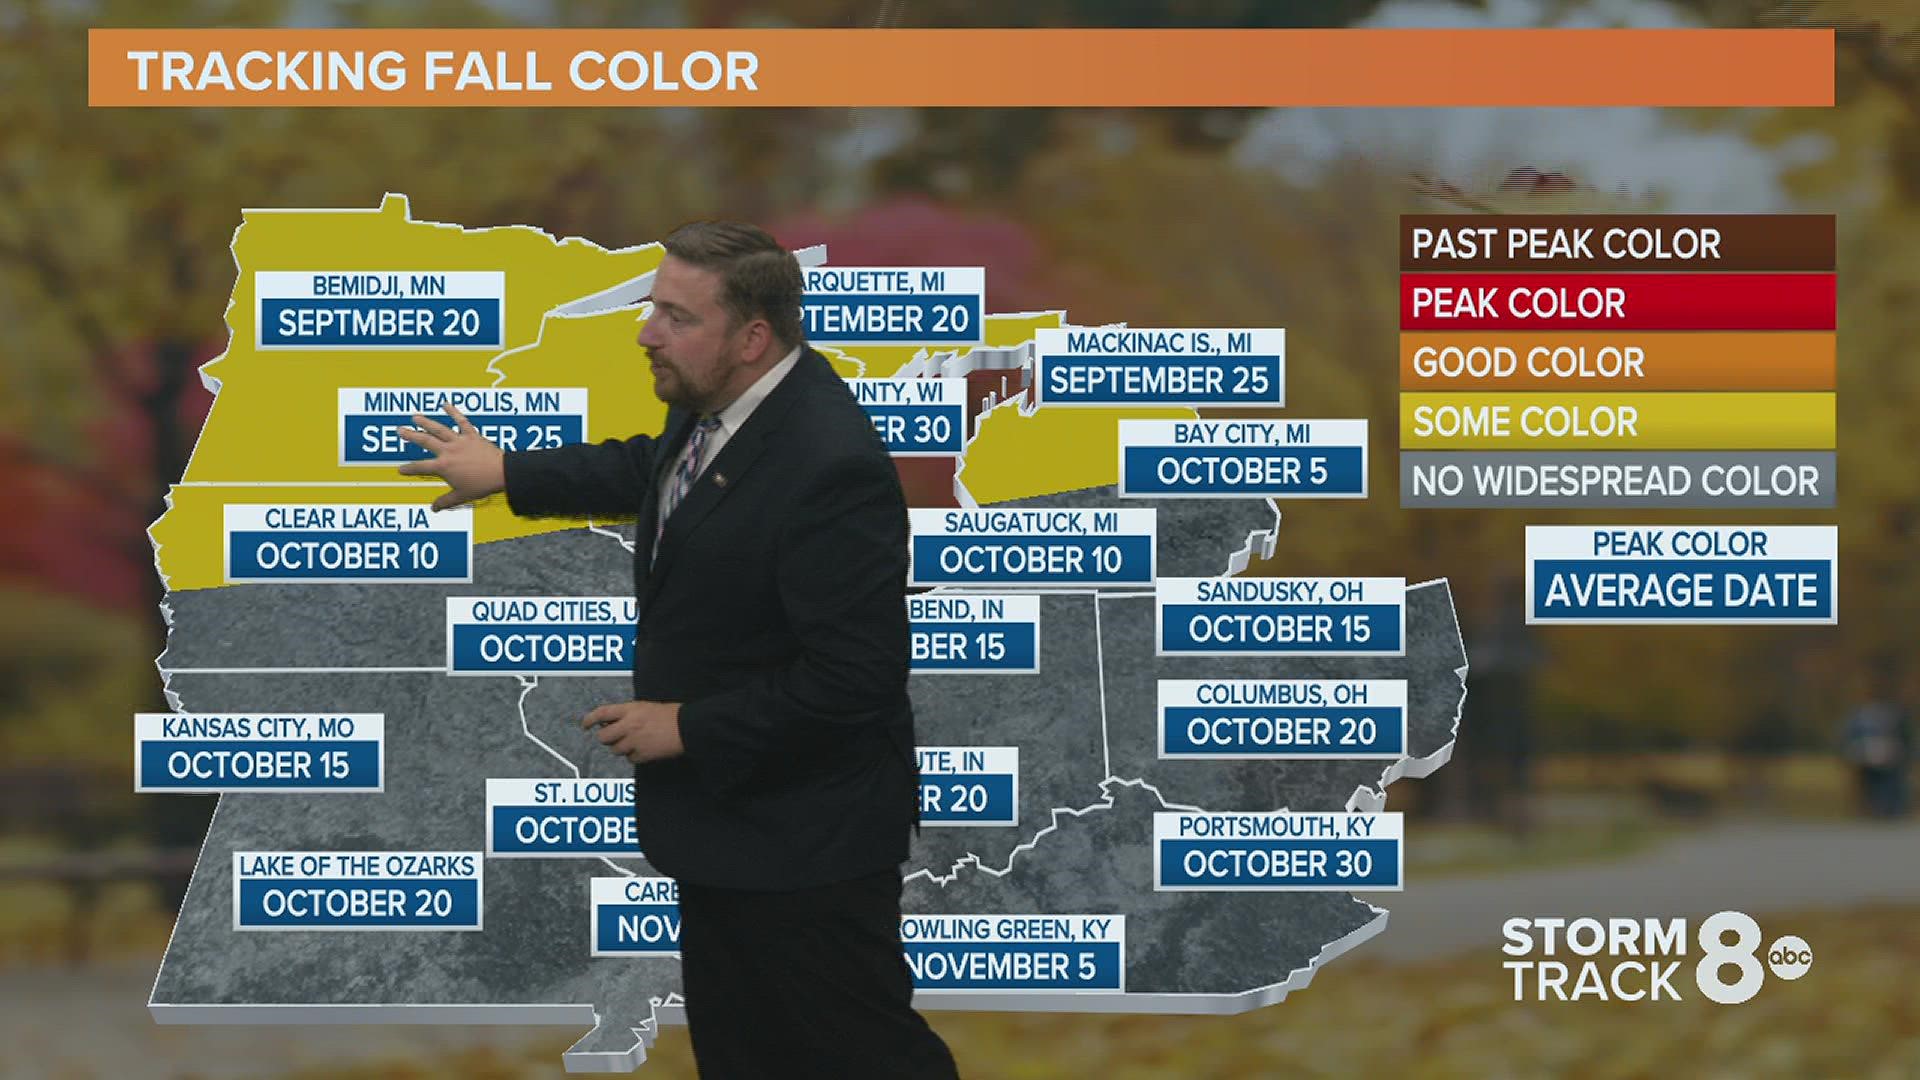 Here's when we can expect the peak color to arrive in the Quad Cities region.